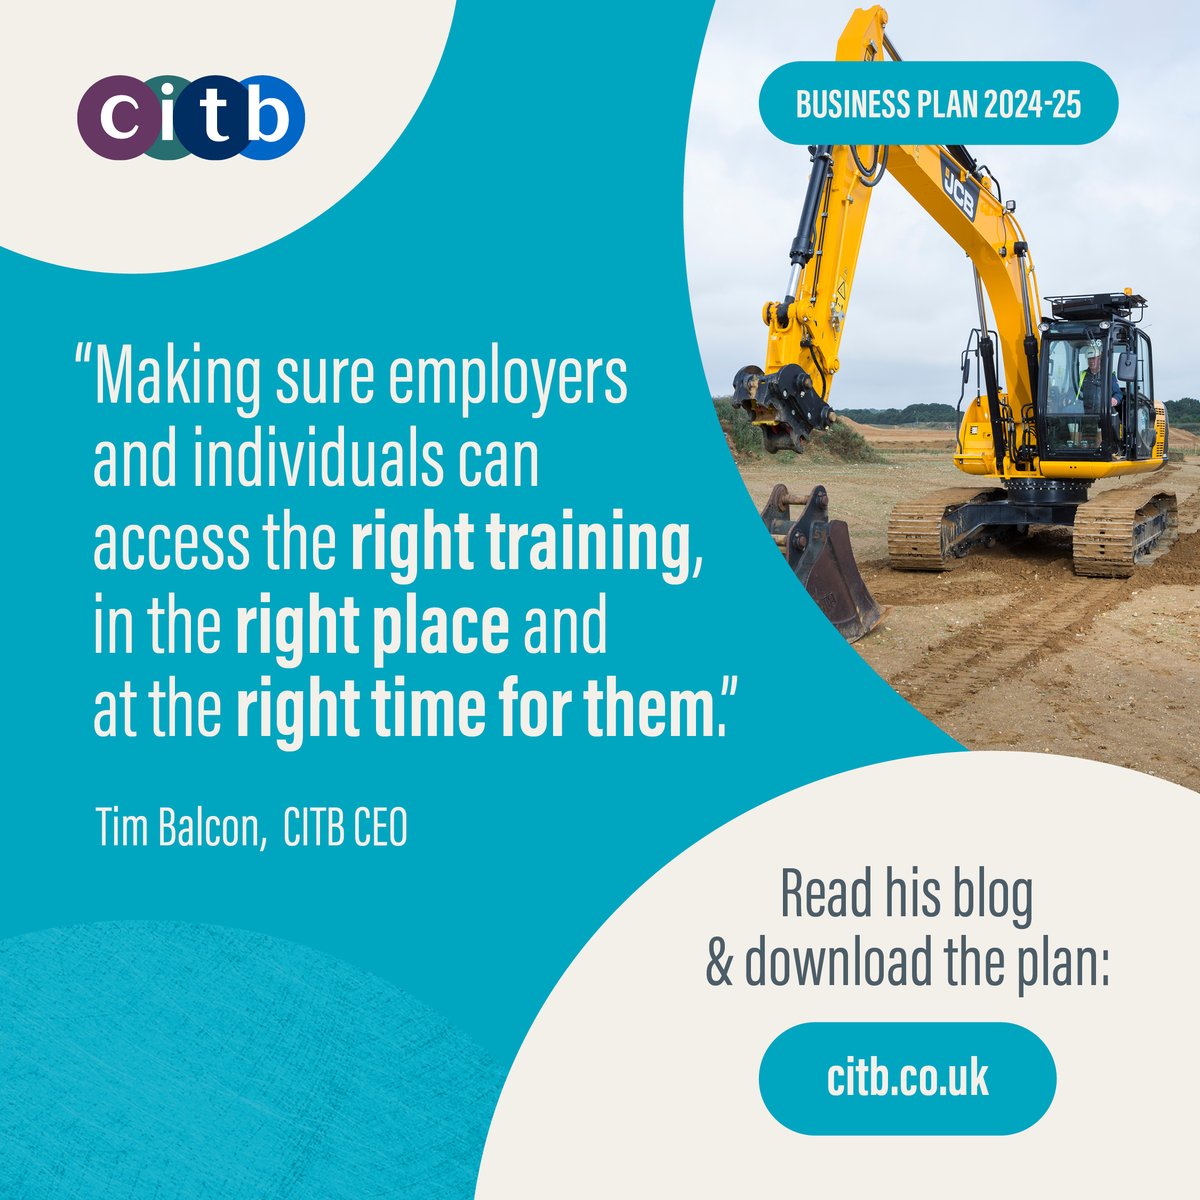 The launch of this year's Business Plan shows our intention to work in partnership with #employers so the training demands of the #construction industry can be met with high-quality, accessible #training provision. Read CITB CEO Tim Balcon's blog here: bit.ly/3JzwhtX